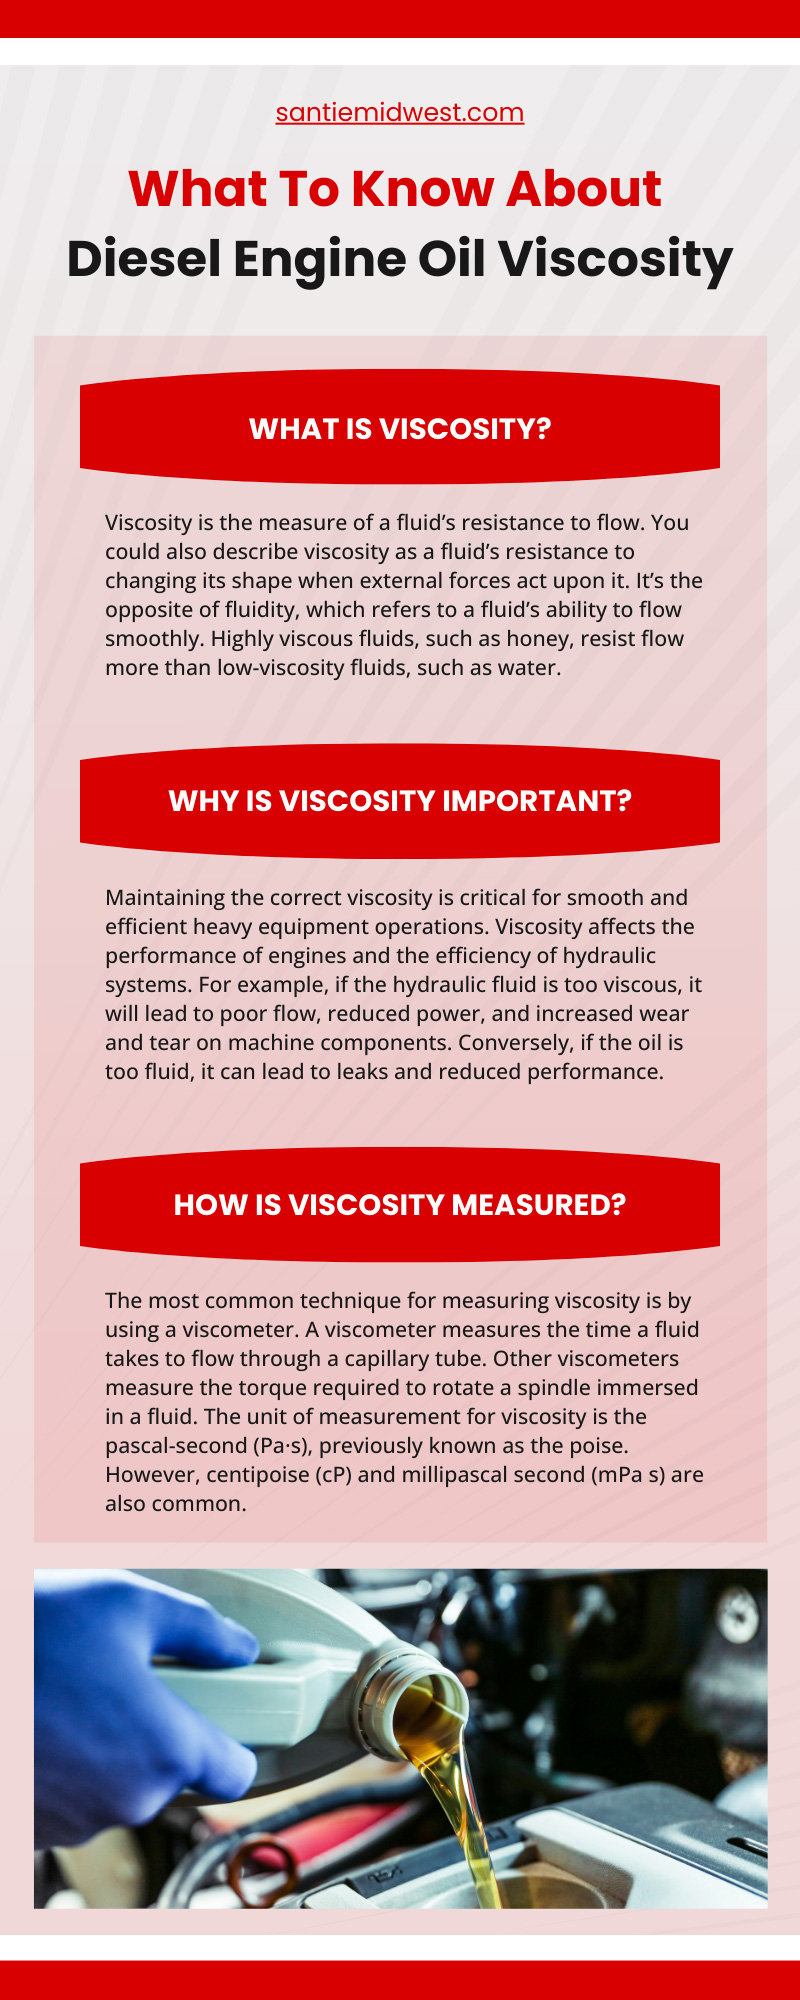 What To Know About Diesel Engine Oil Viscosity